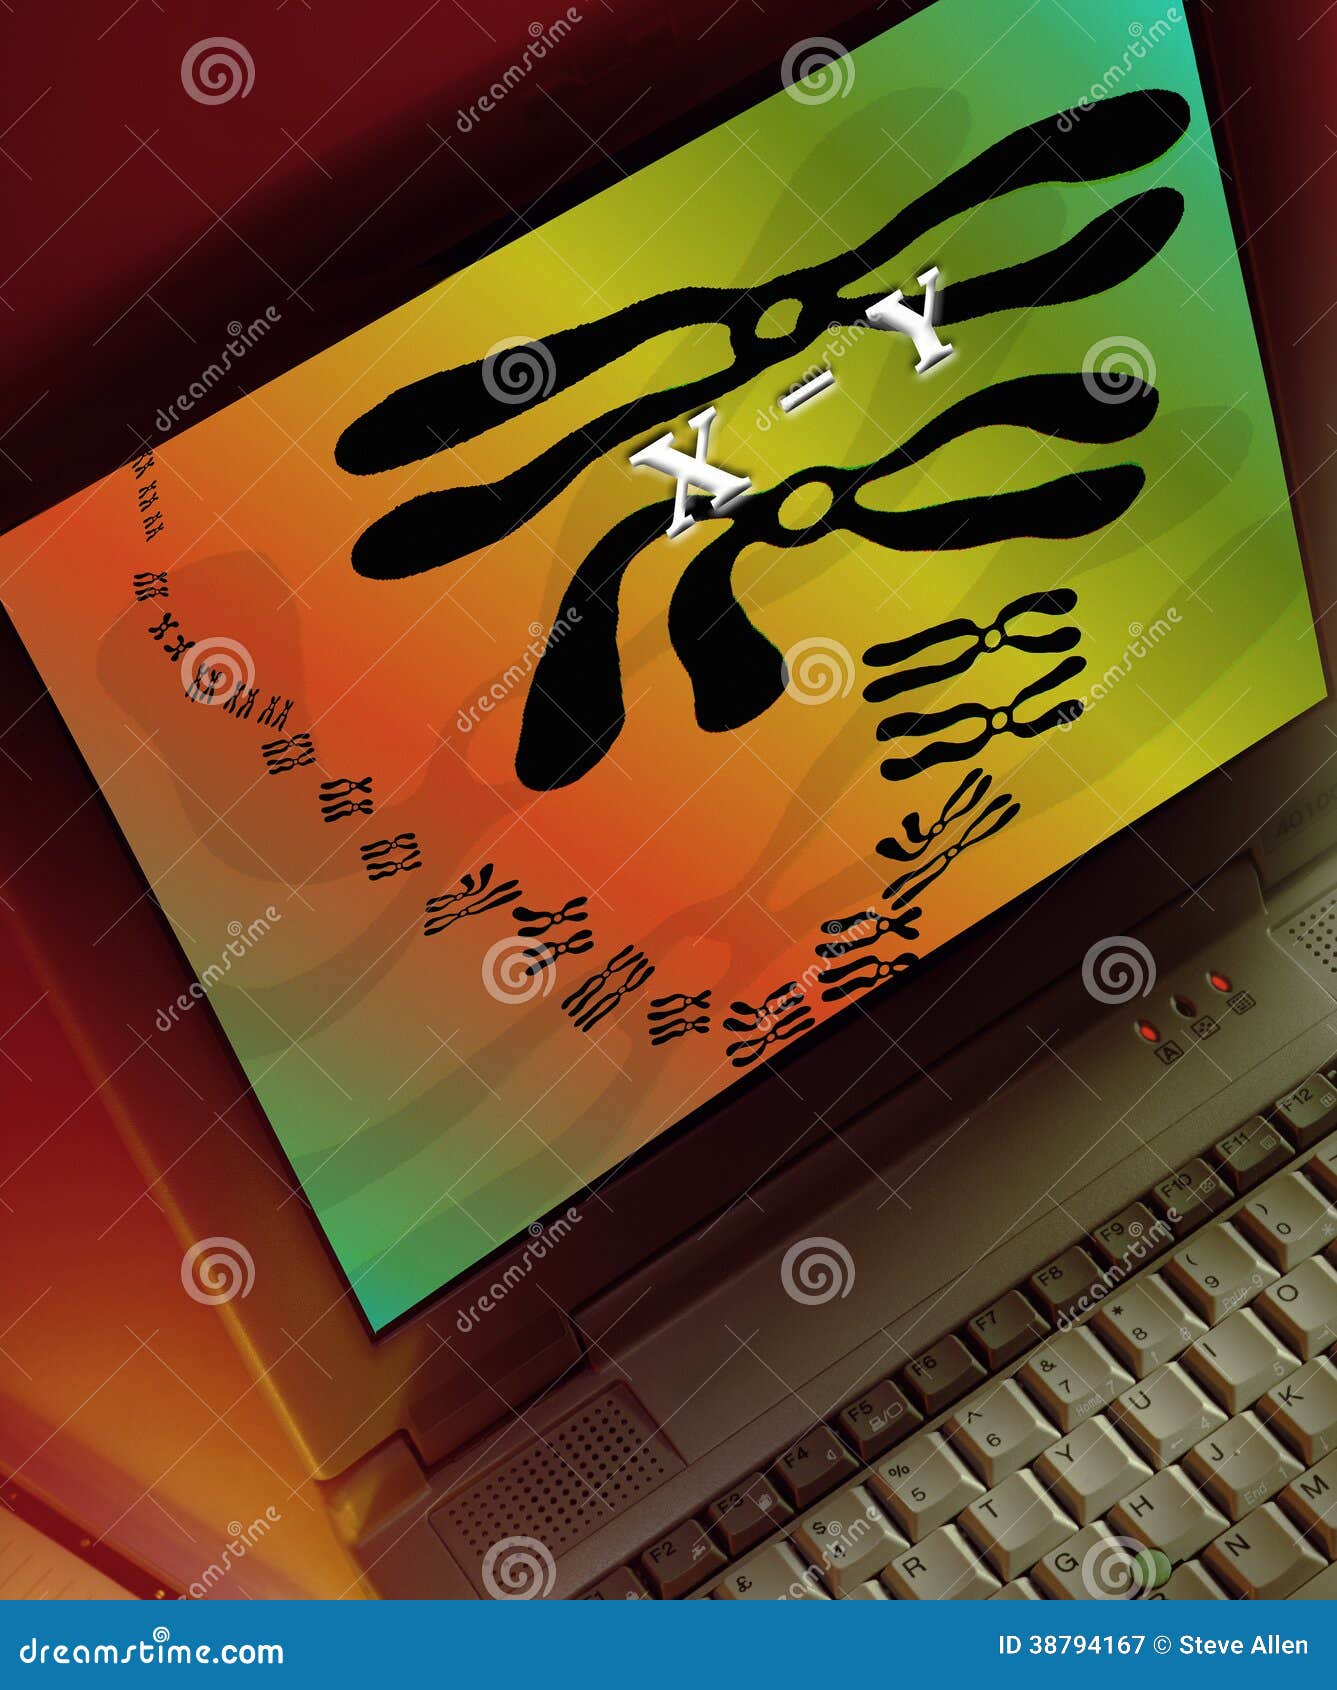 chromosomes on a computer screen